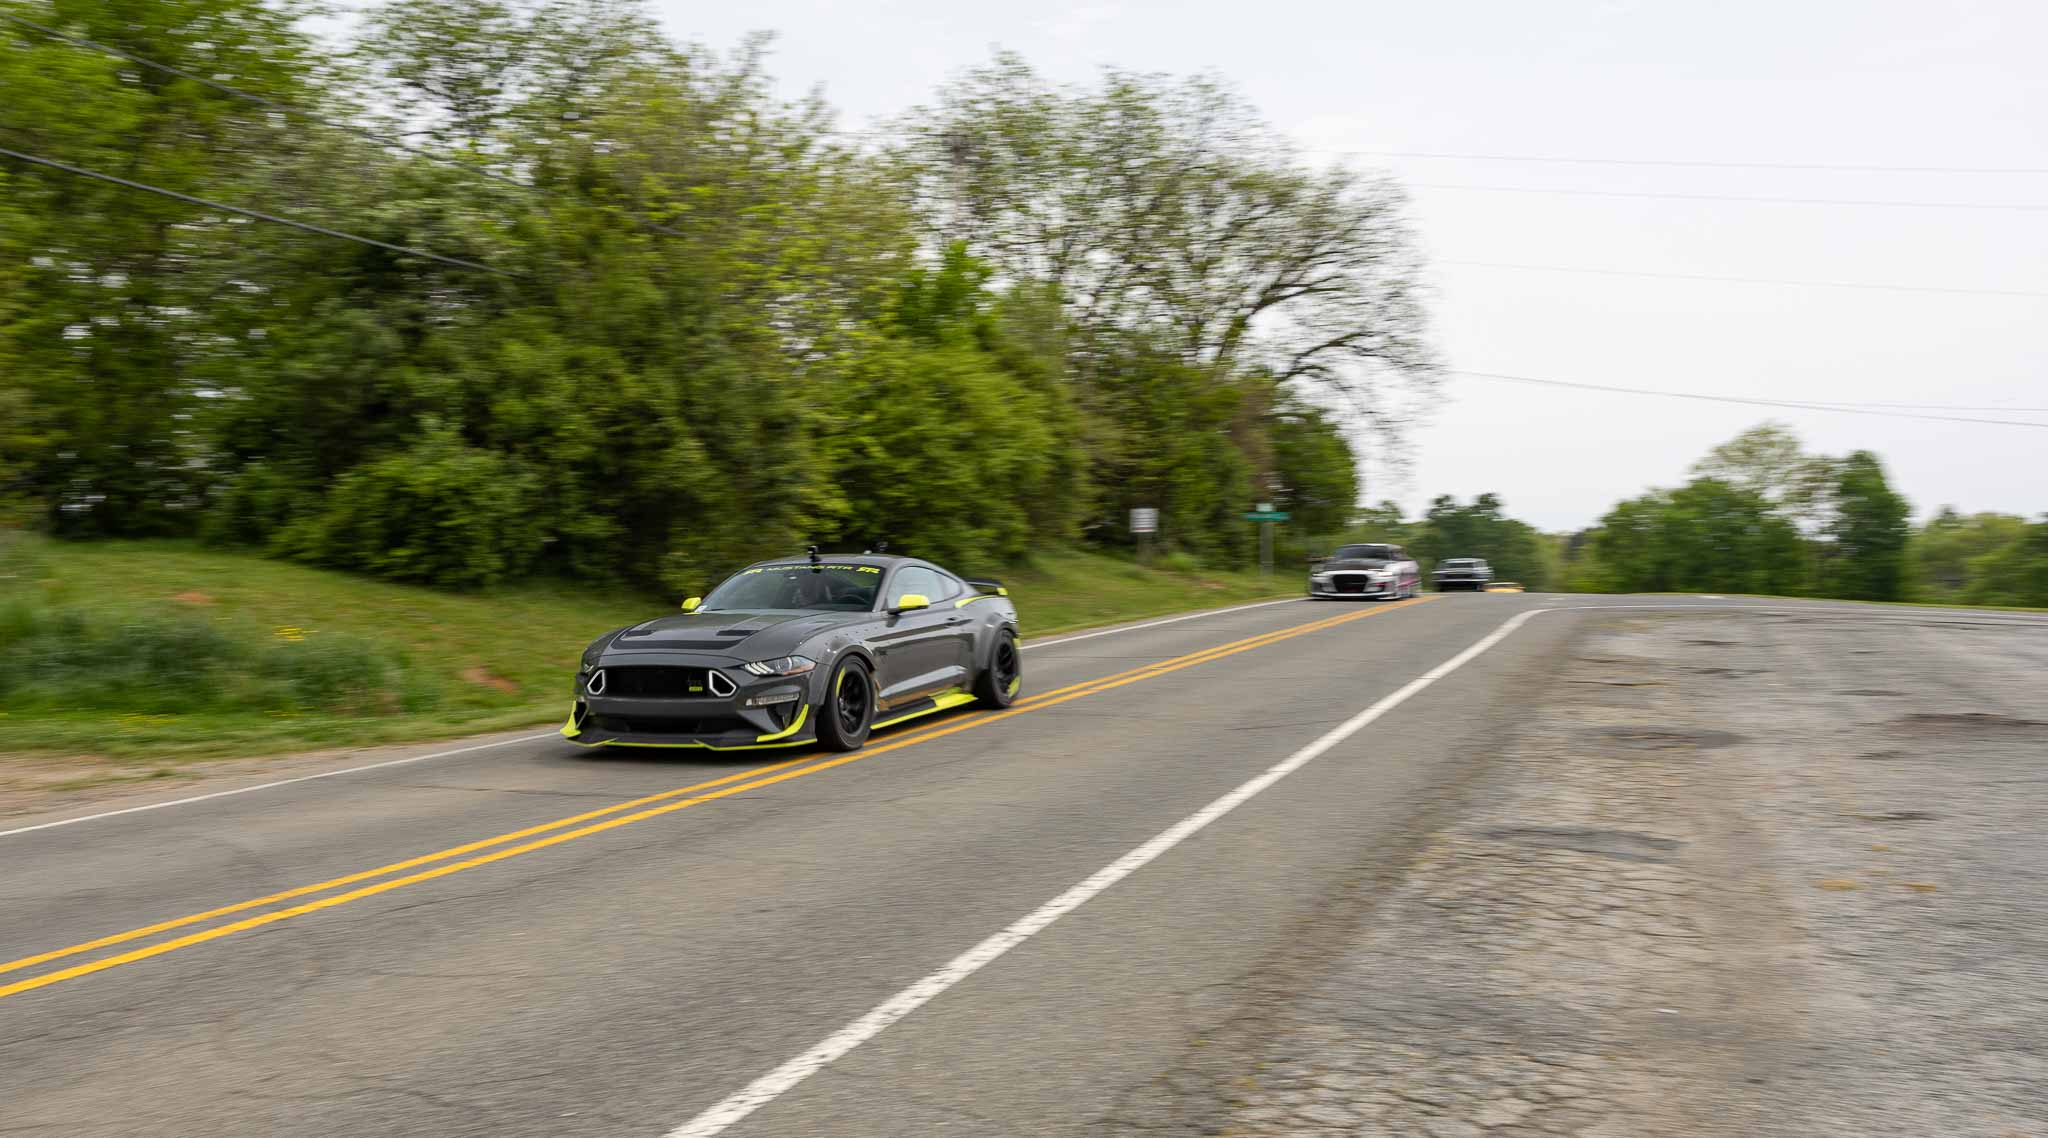 A 10th anniversary edition Mustang RTR spec 5 cruises down a rural road